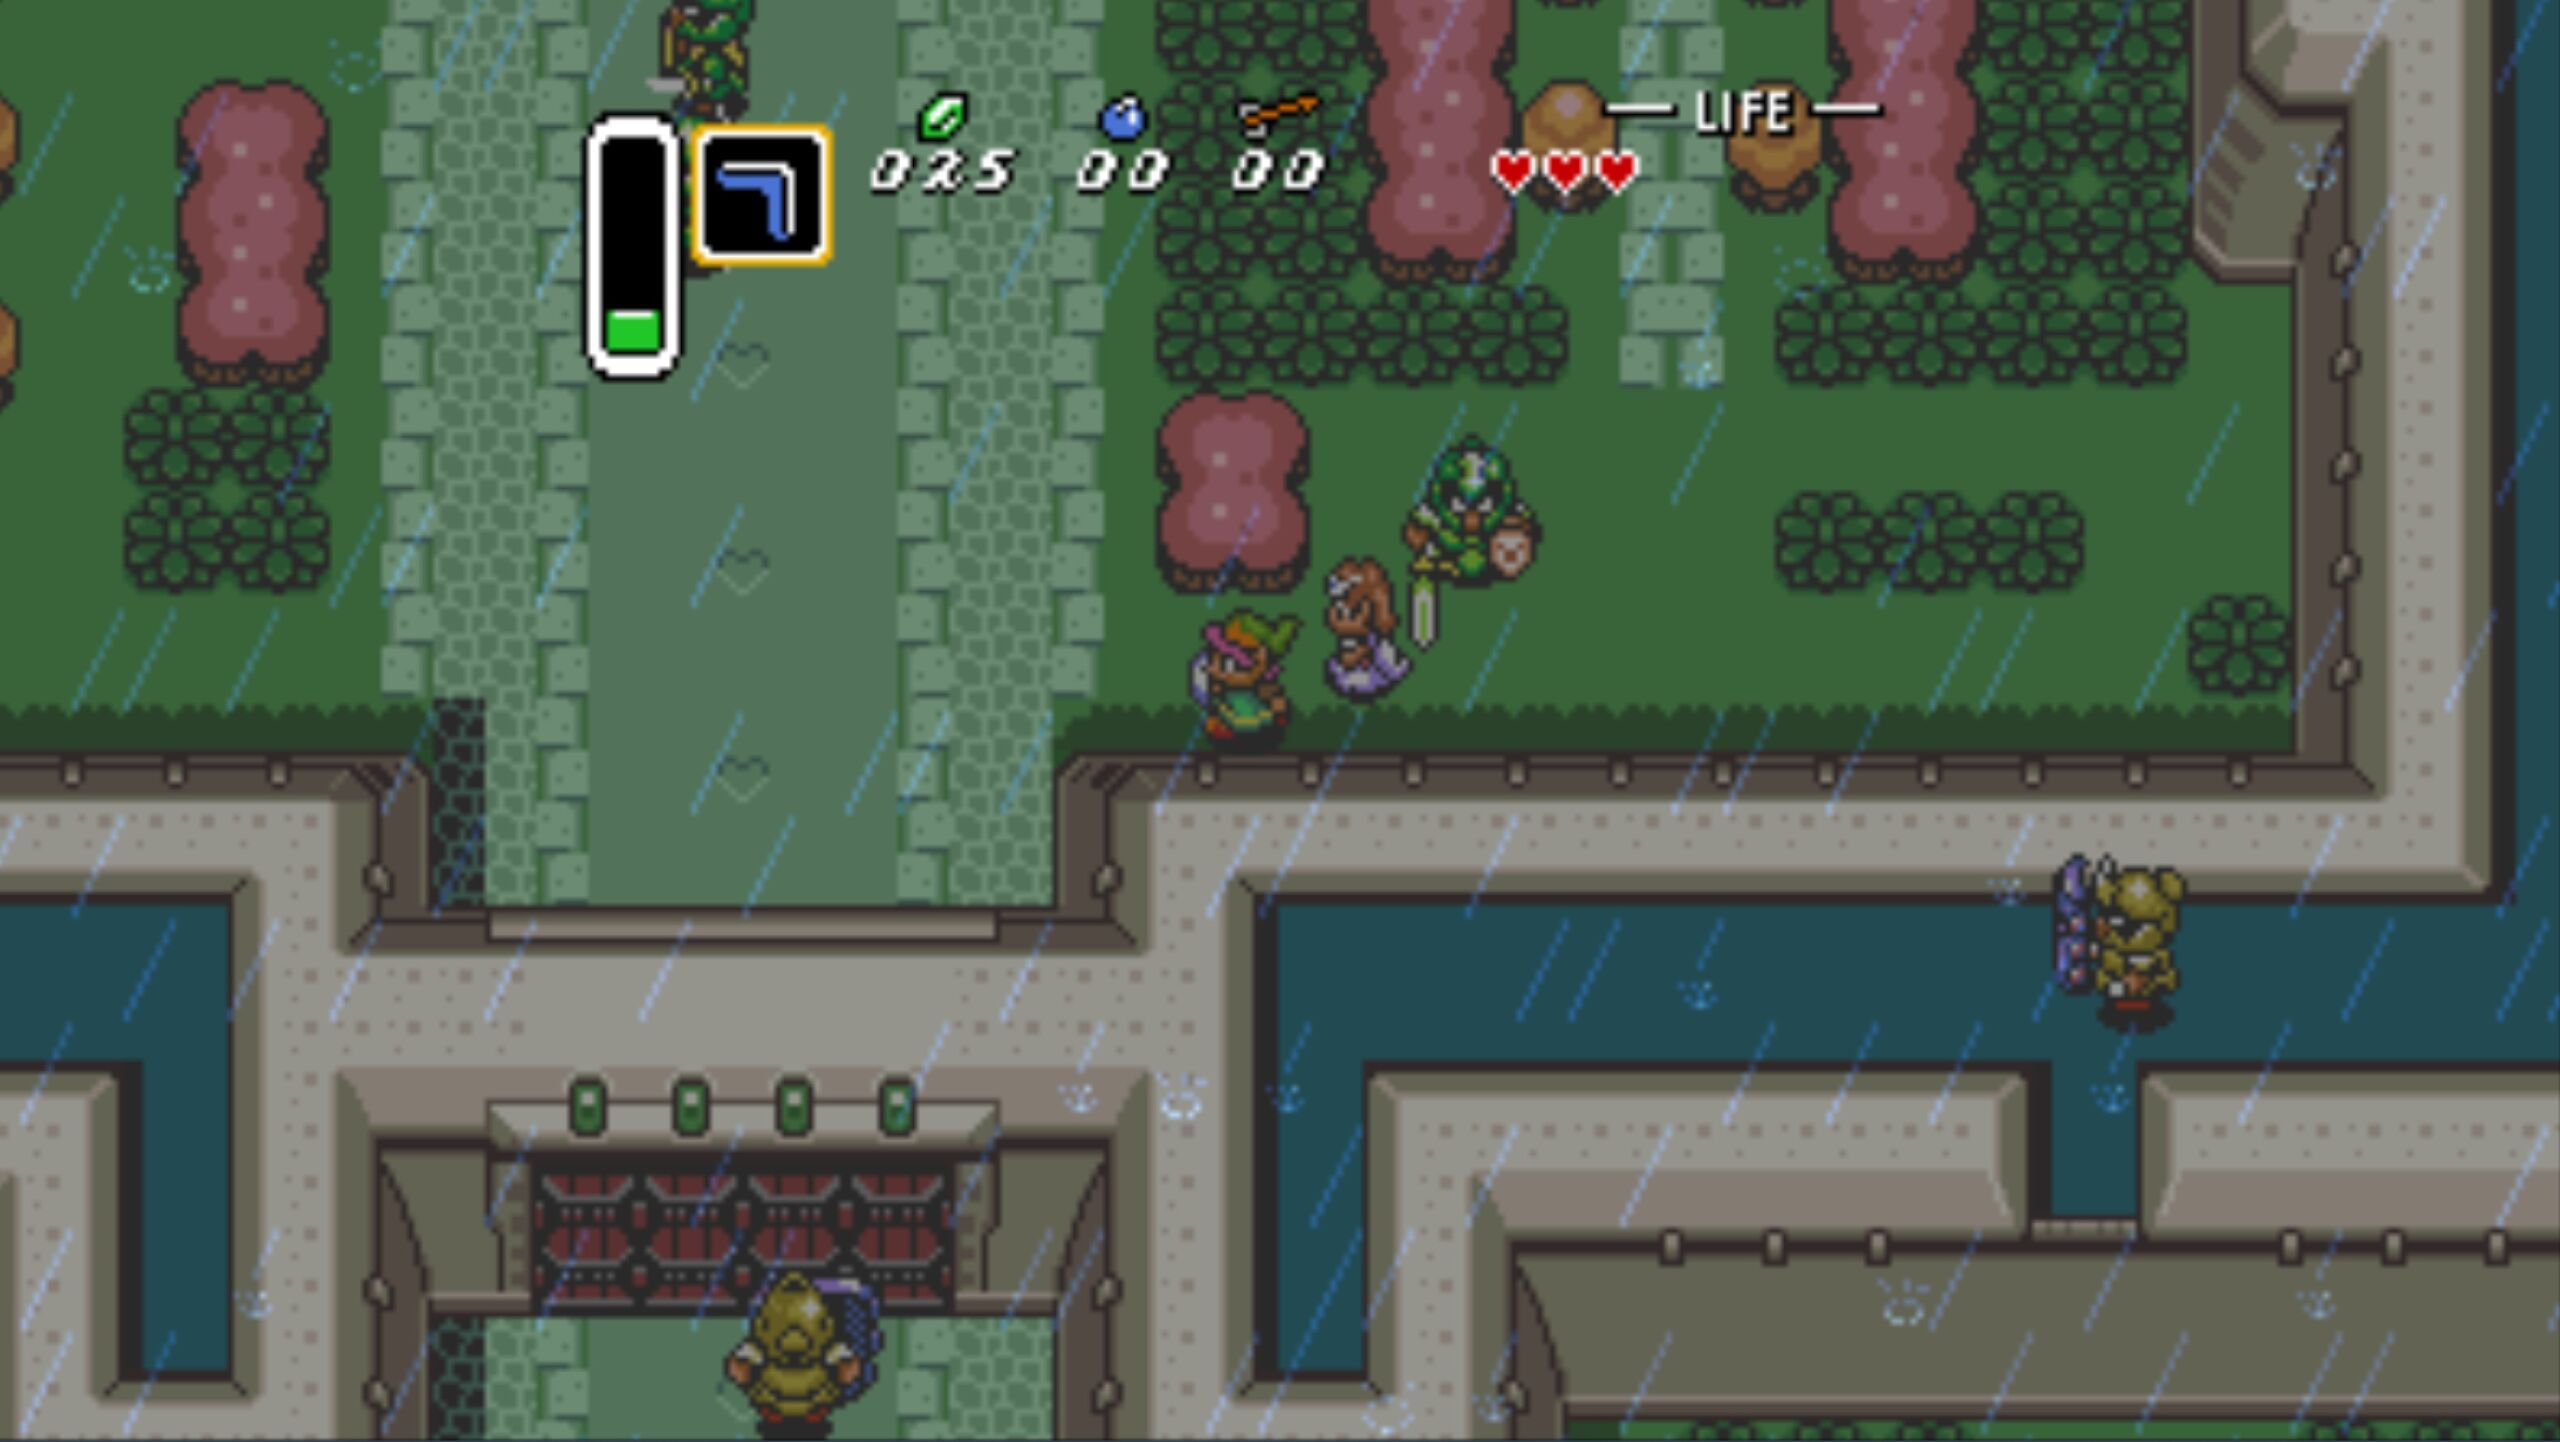 Legend Of Zelda, The - A Link To The Past ROM - SNES Download